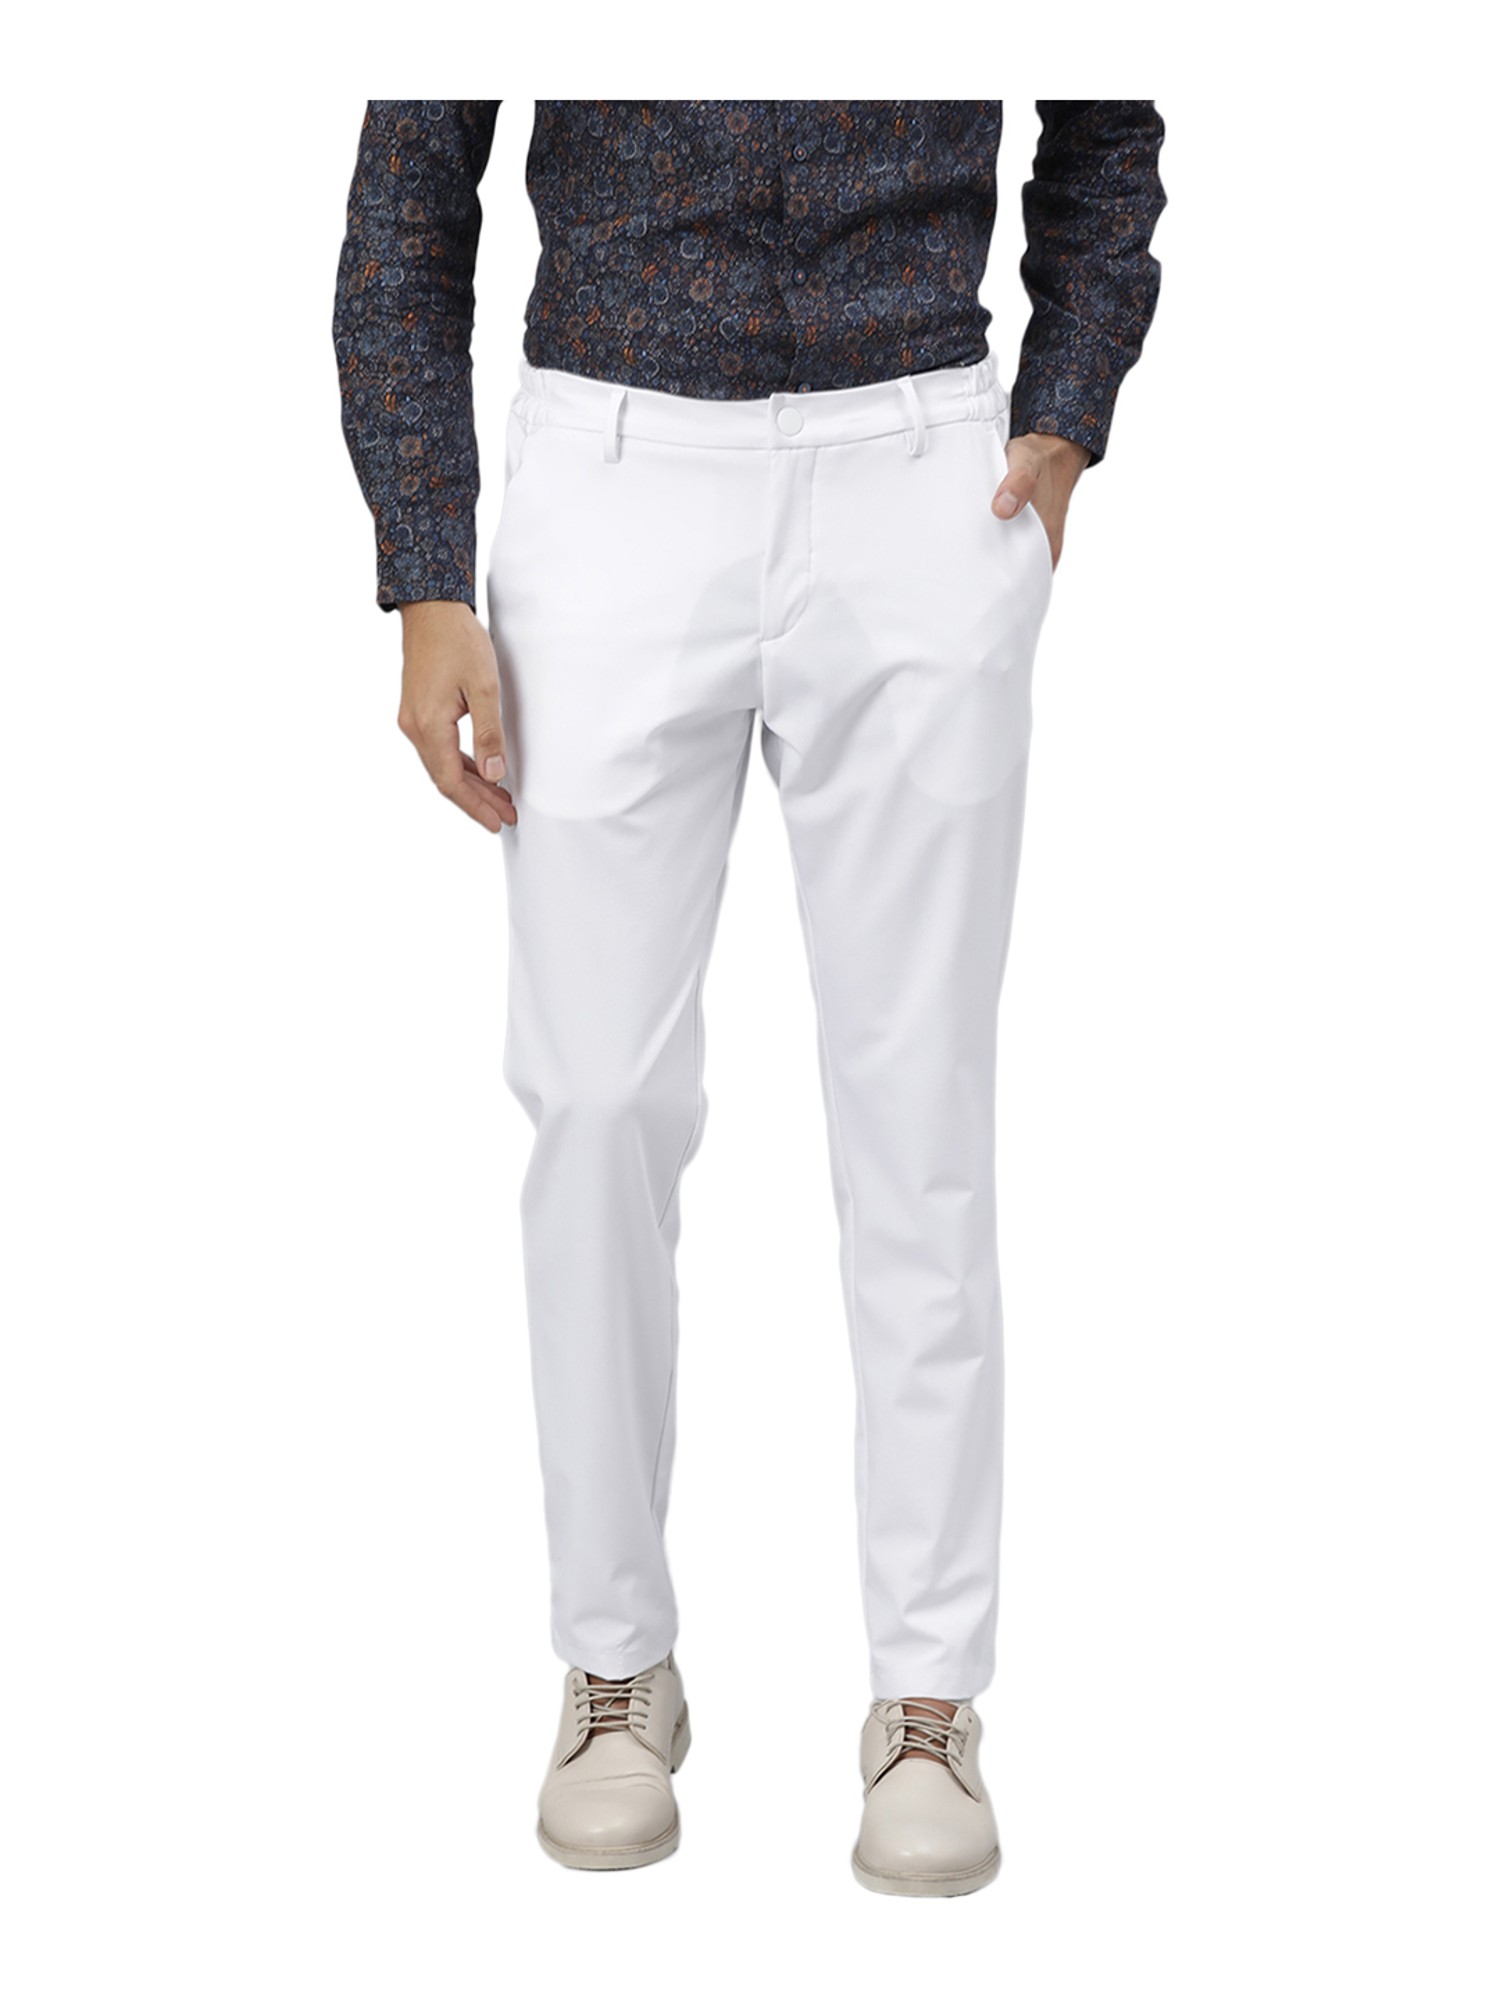 Buy Slim Fit Flat Front Trousers with Insert Pockets Online at Best Prices  in India  JioMart